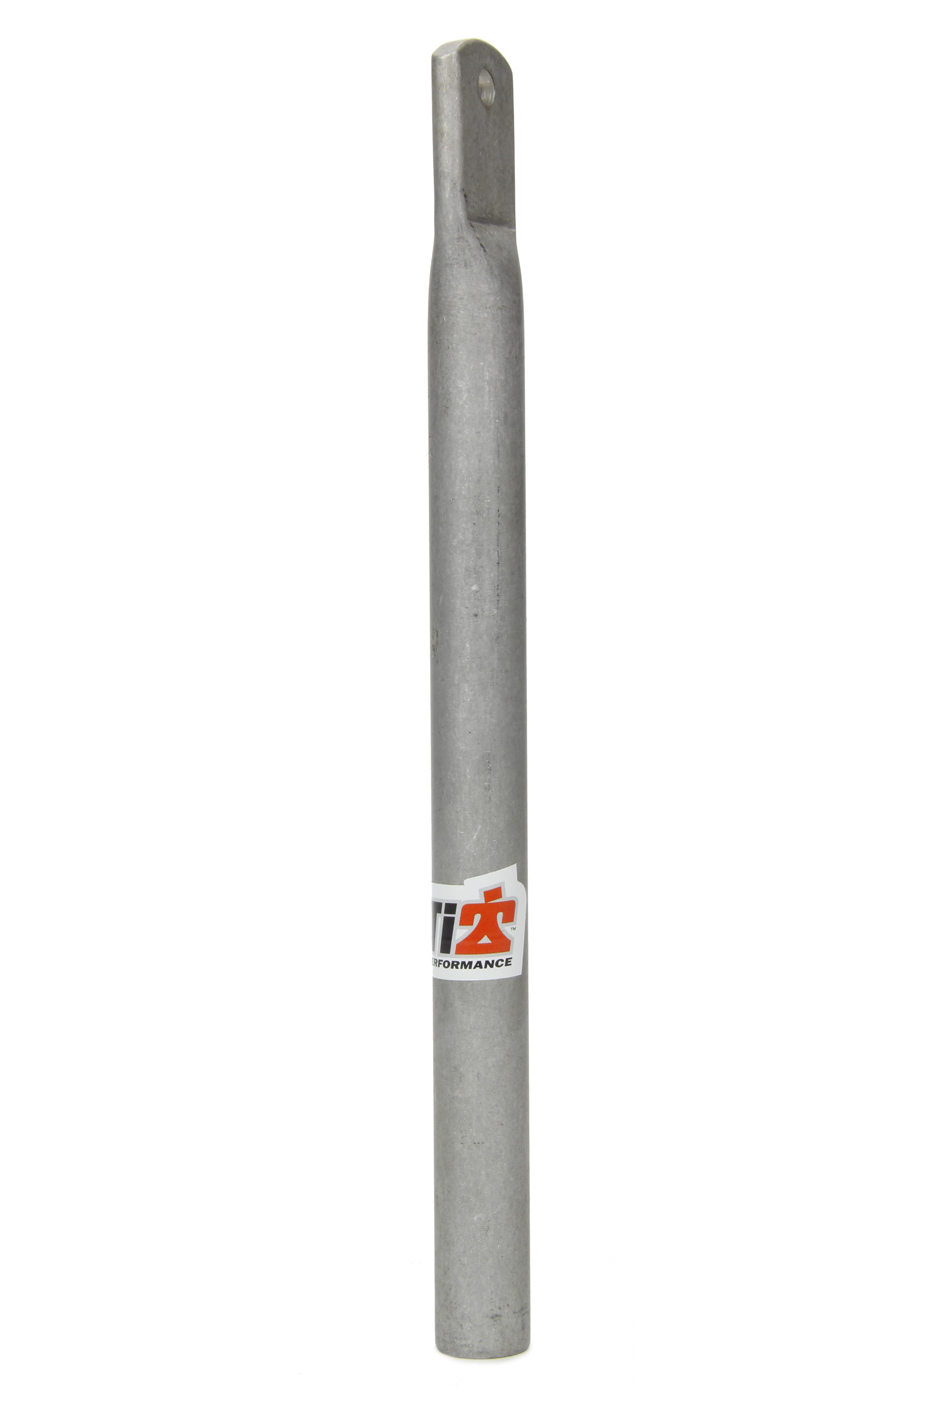 Ti22 Performance 3796 Wing Post, Nose, 10 in Long, Straight, Aluminum, Natural, Mini Sprint, Each